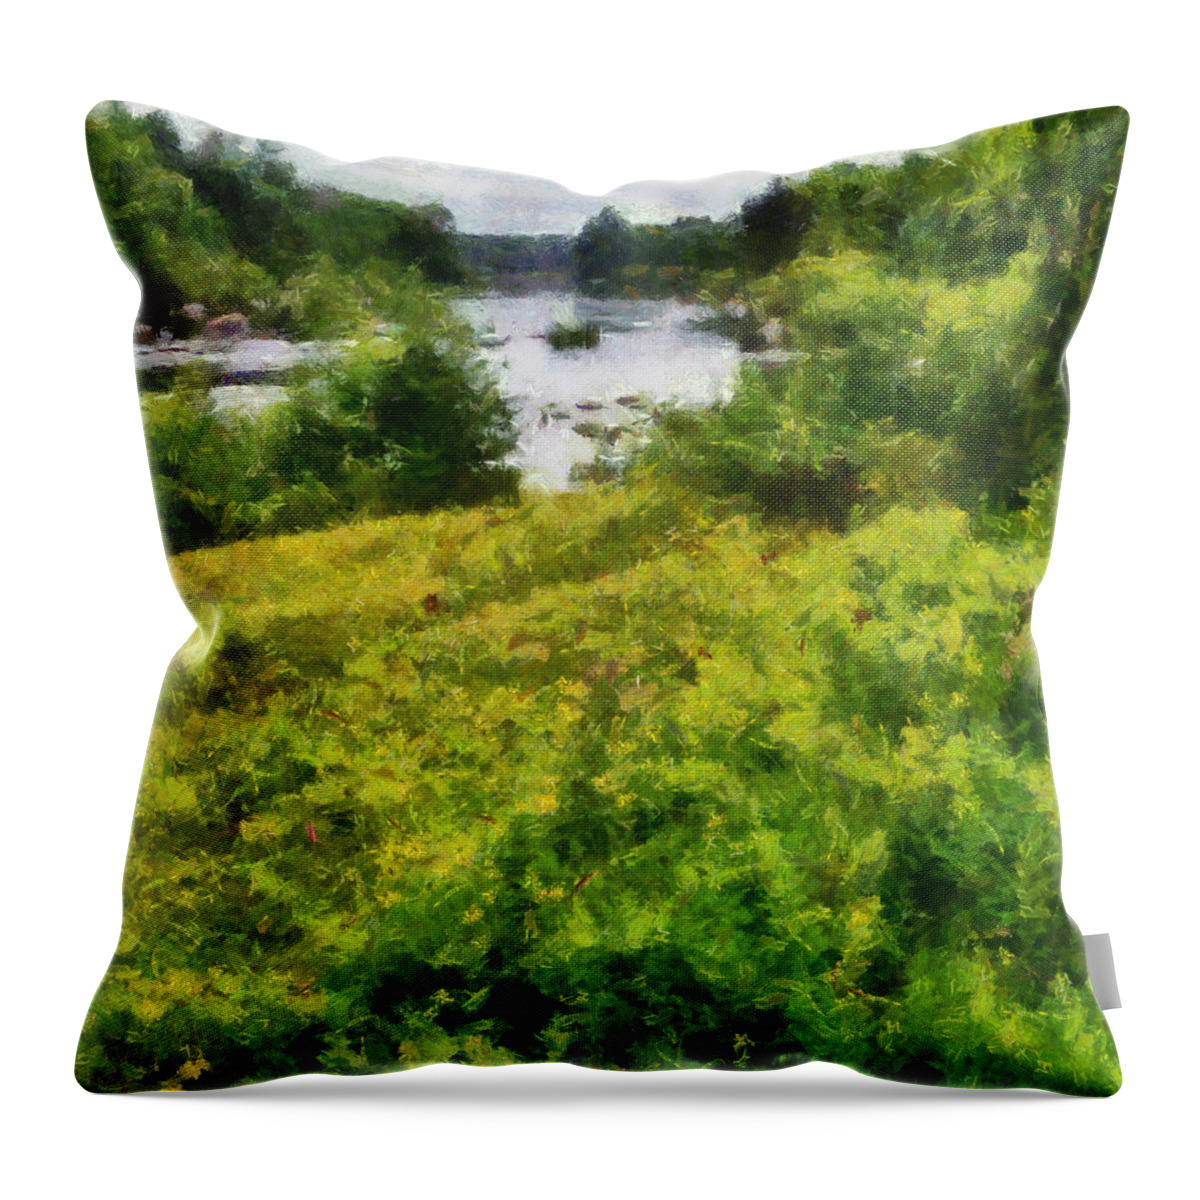 River Throw Pillow featuring the painting Wolf River by Michelle Calkins